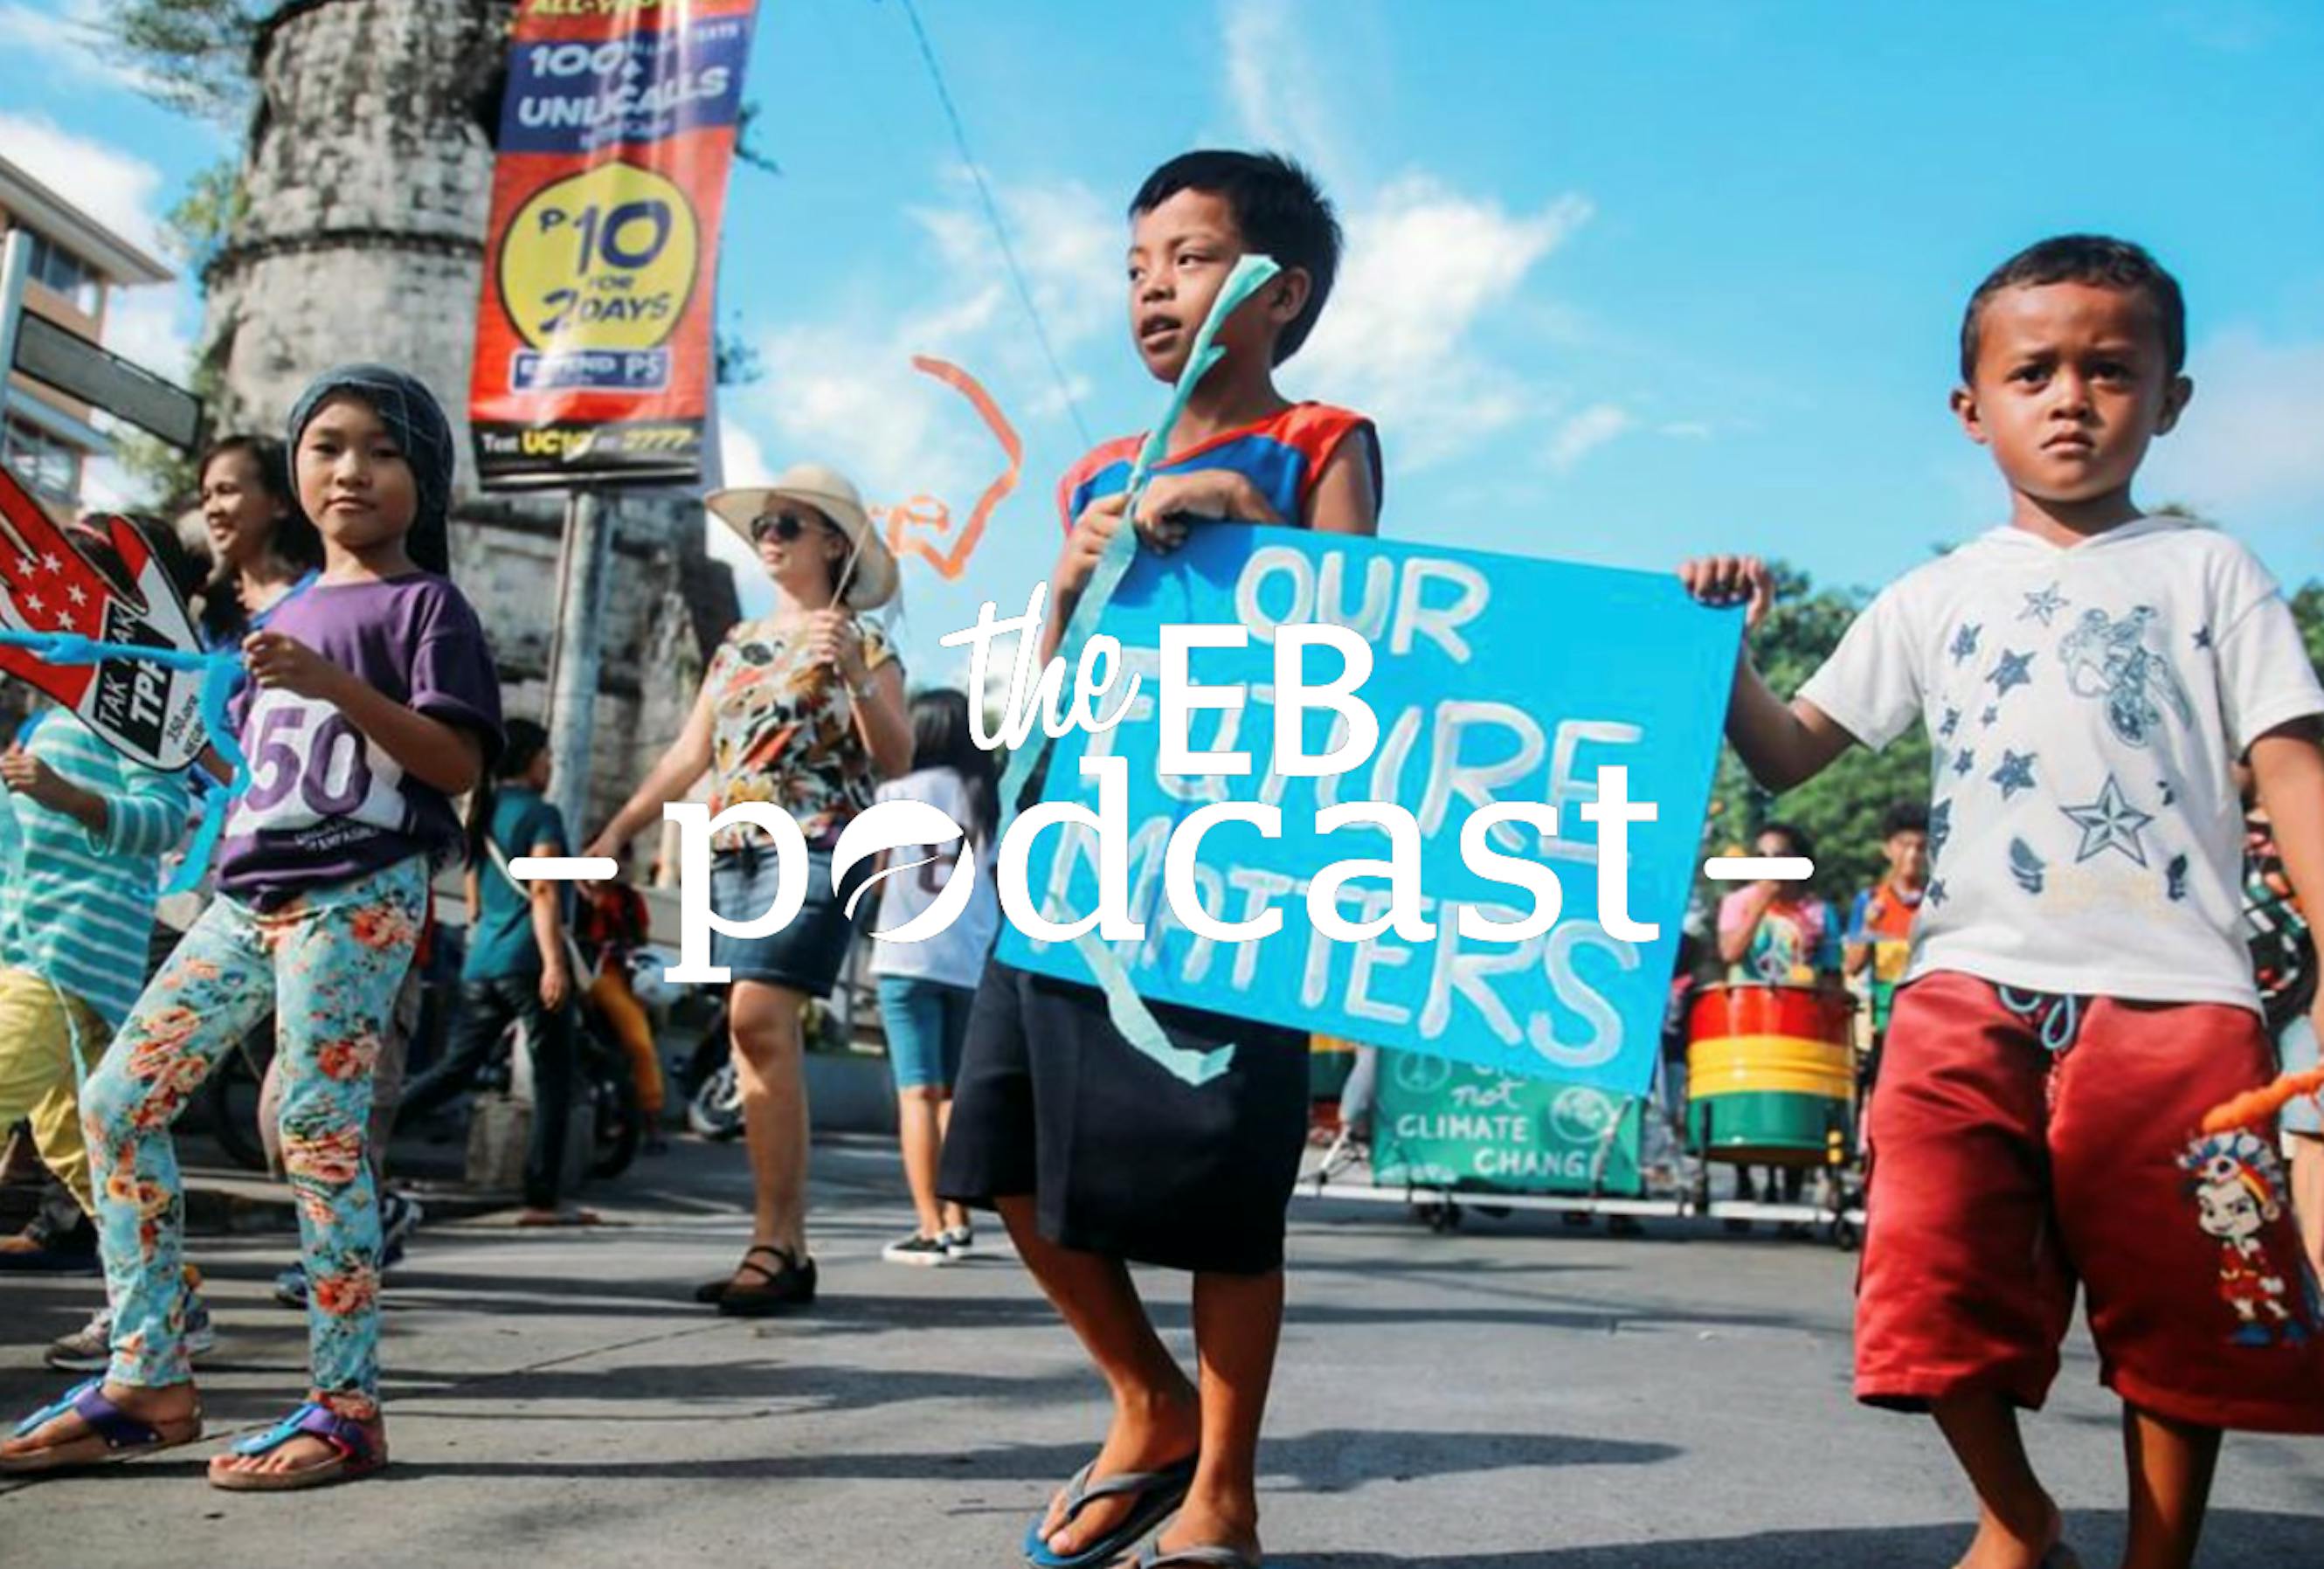 A protest for climate justice in the Philippines